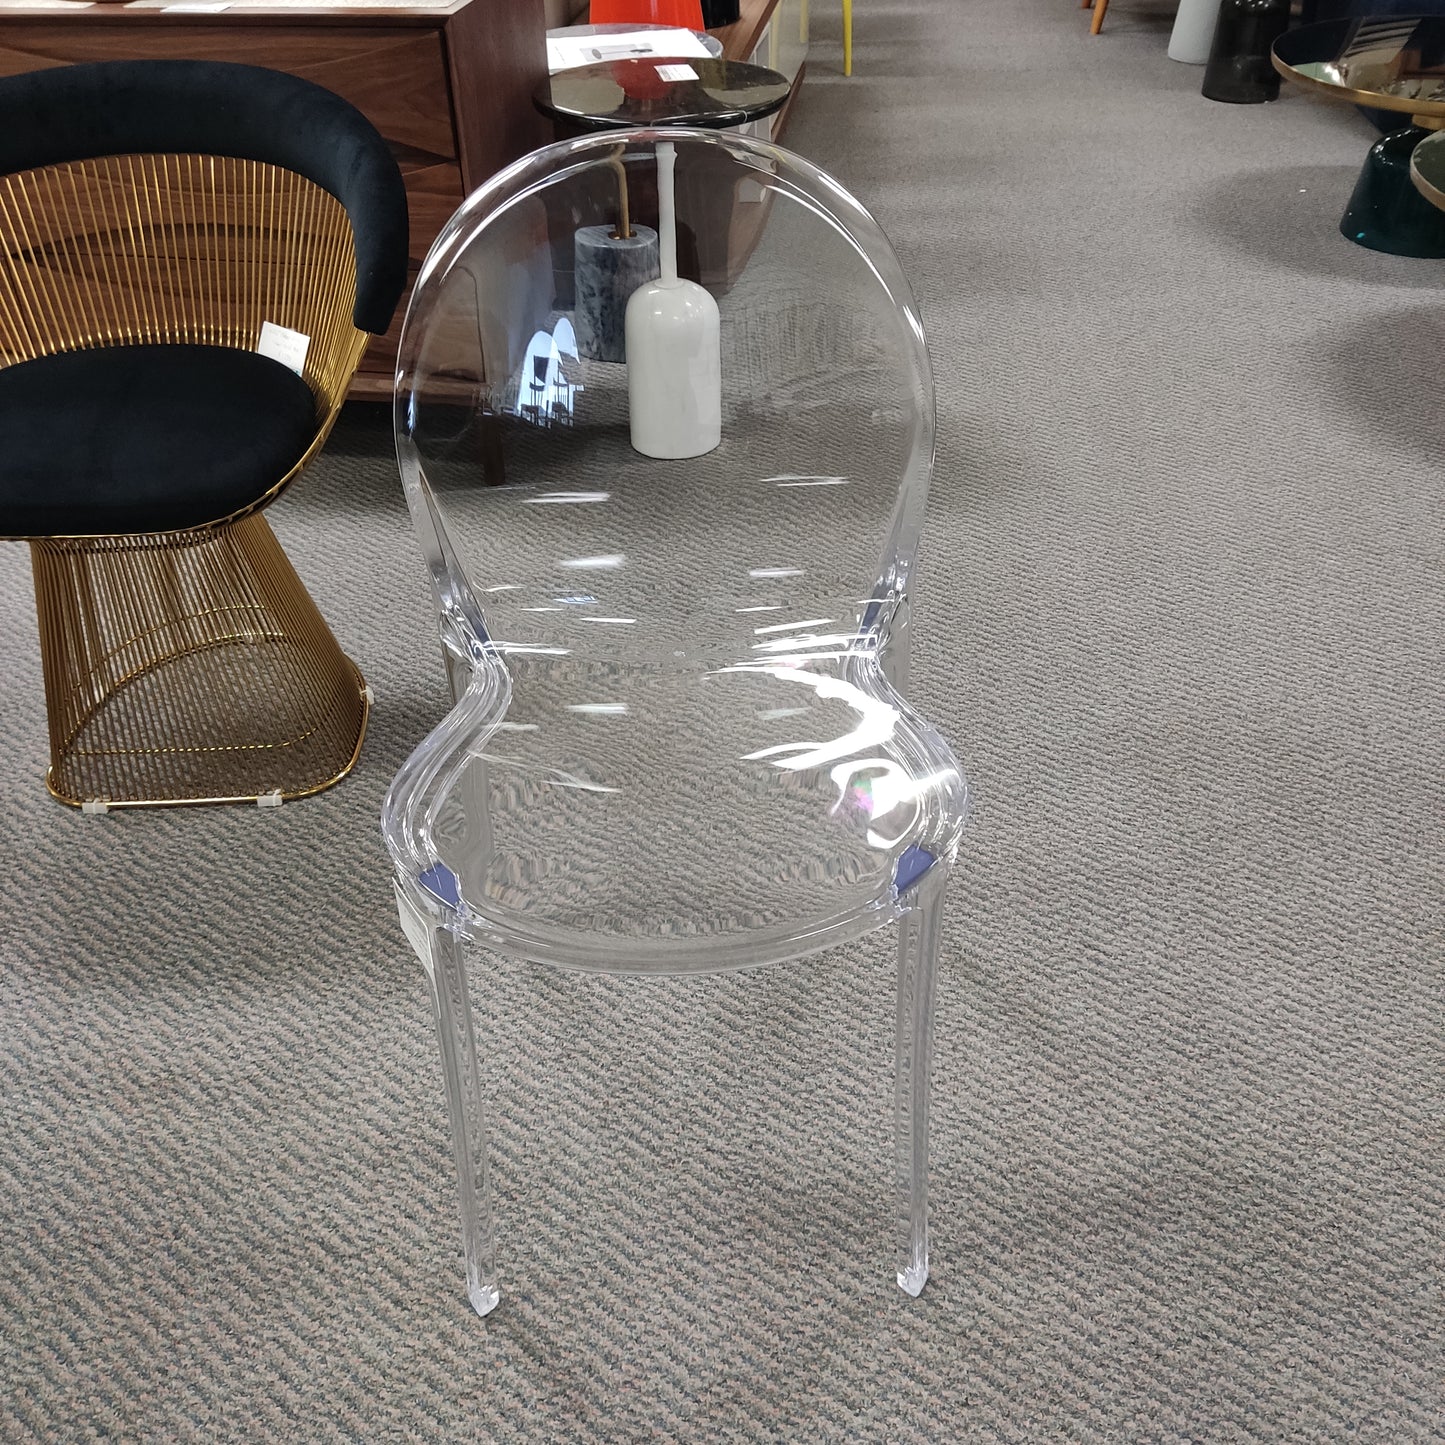 *MG* Ghost Swan Transparent clear armless chair